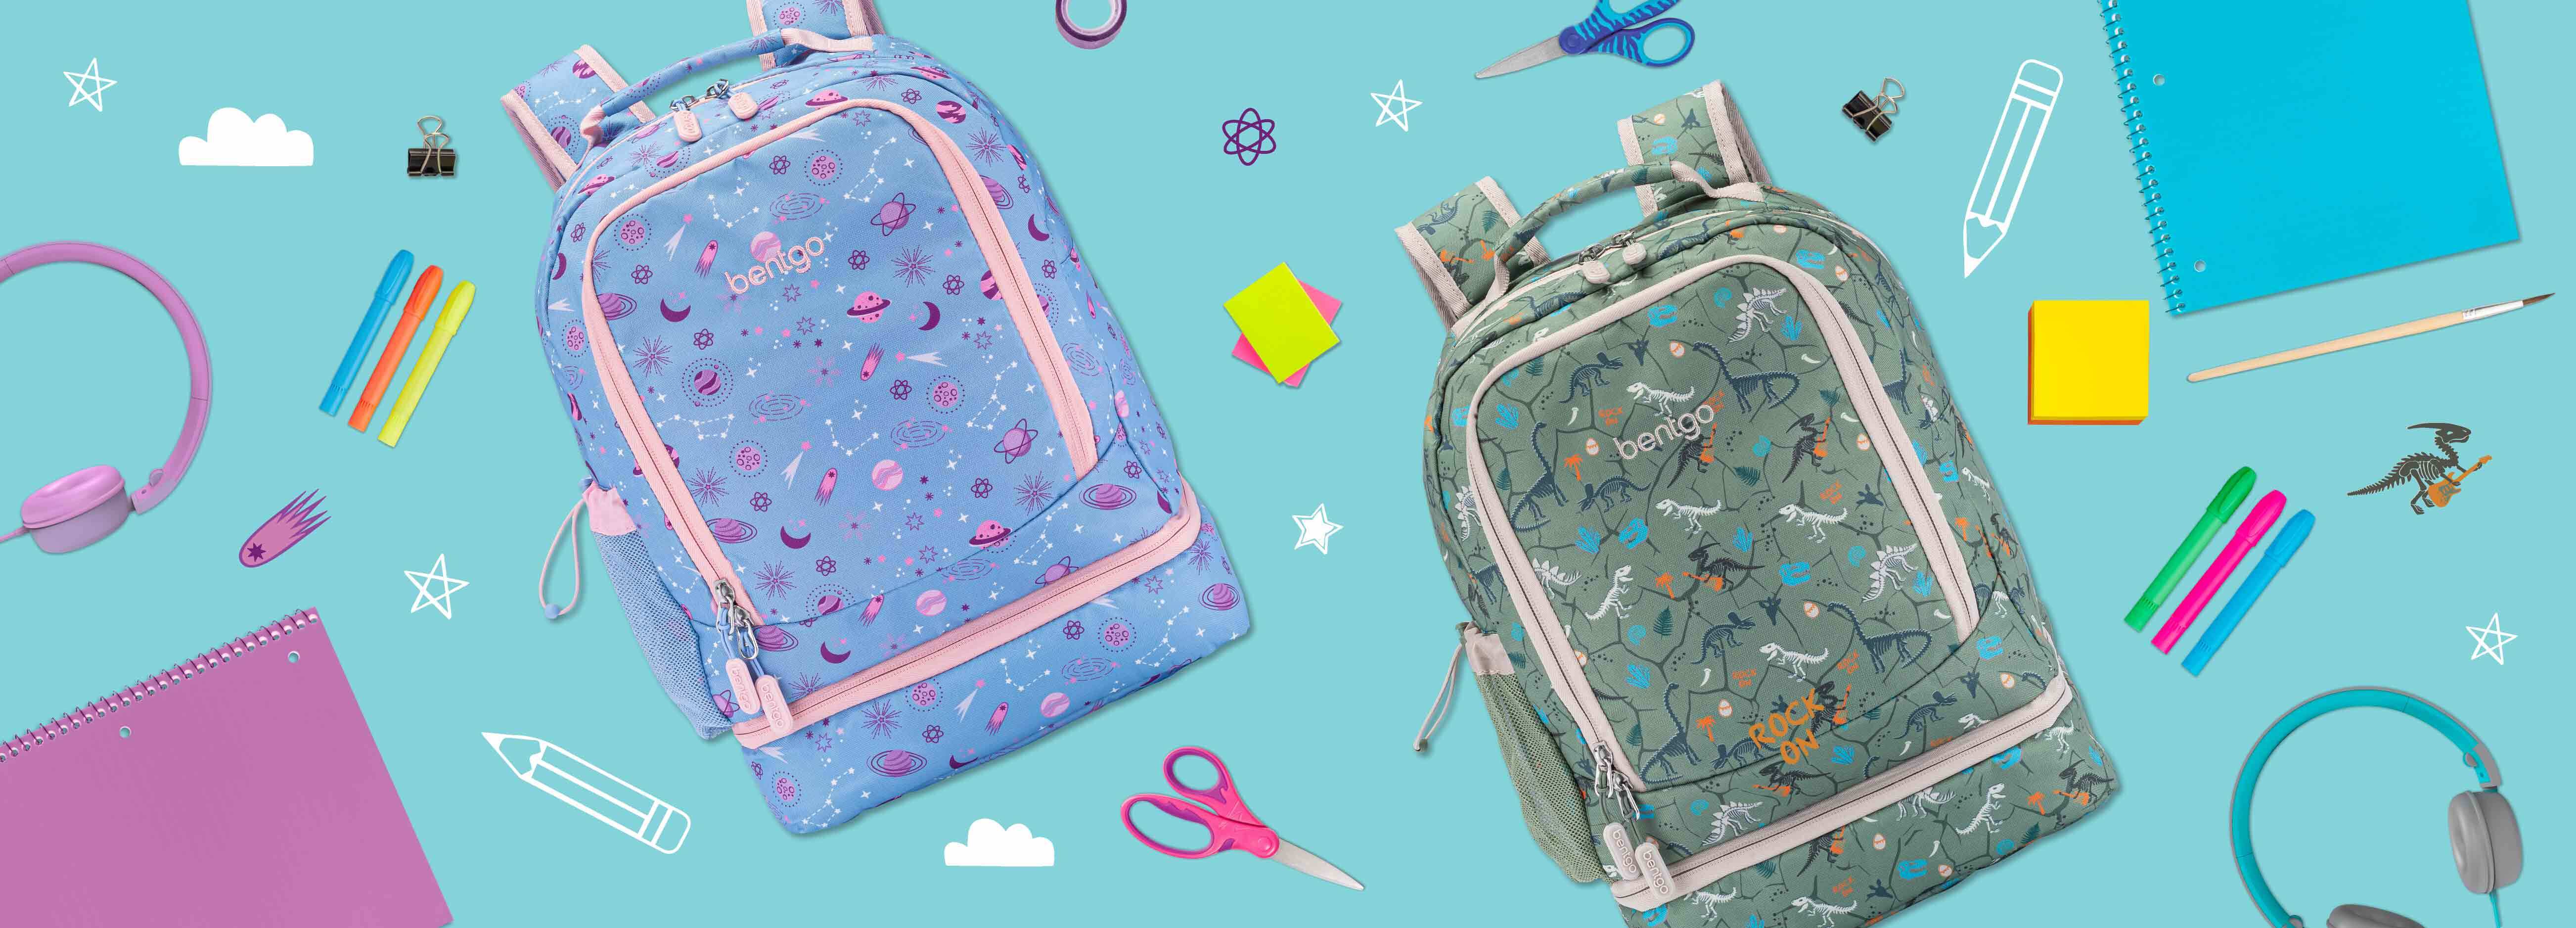  Bentgo® Kids Lightweight 14” Backpack in Unique Prints for  School, Travel, & Daycare - Roomy Interior, Durable & Water-Resistant  Fabric, & Loop for Lunch Bag (Unicorn)